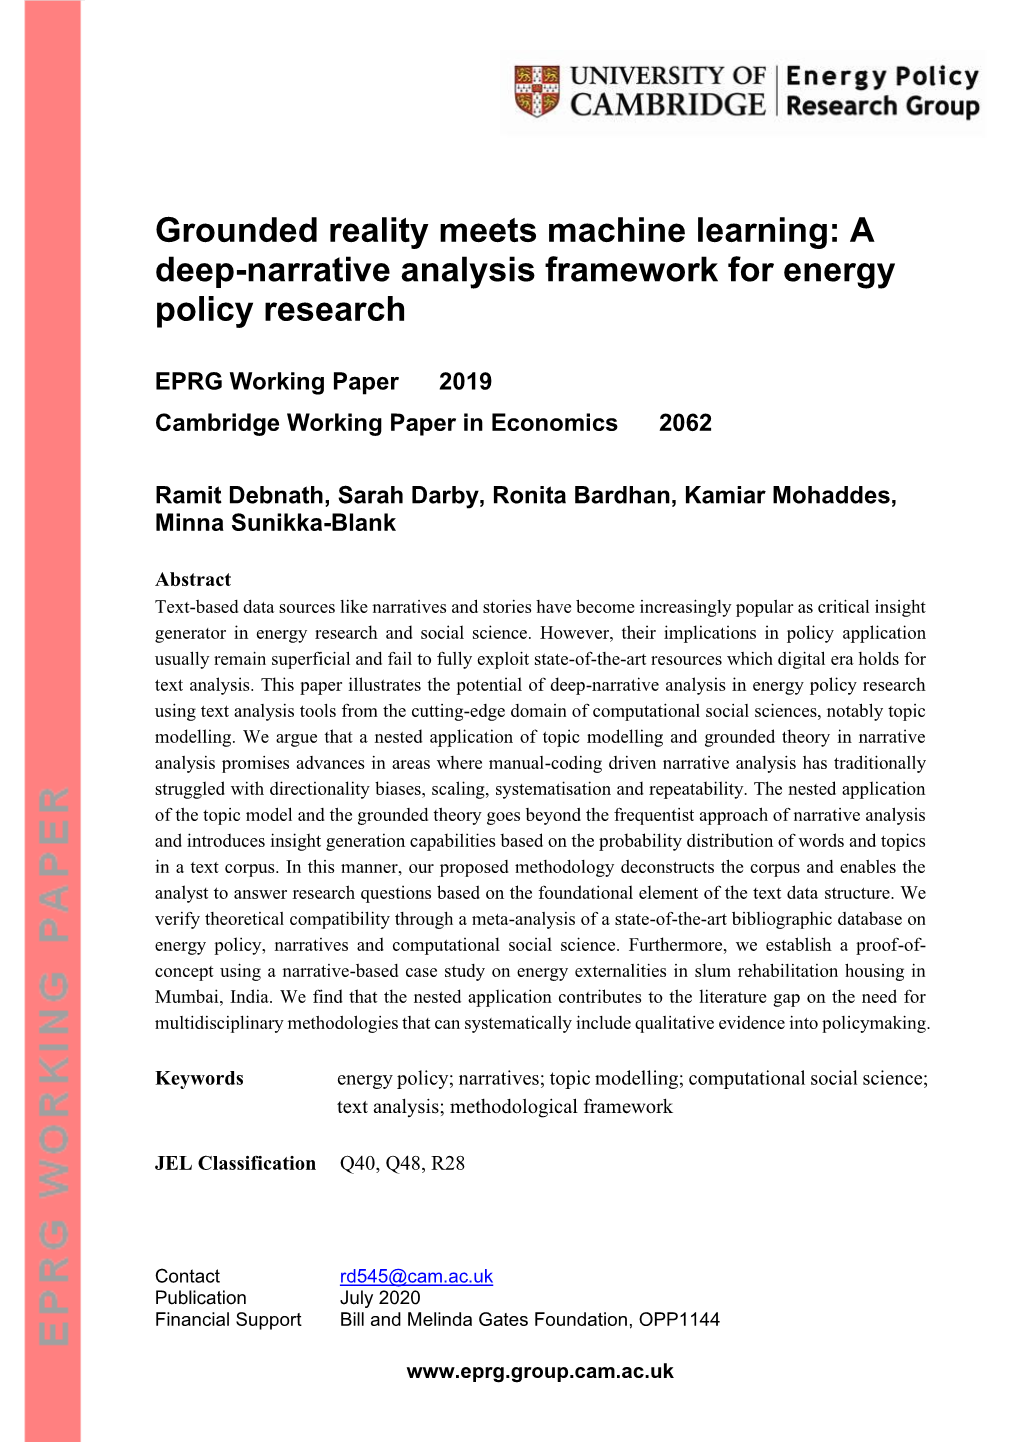 Grounded Reality Meets Machine Learning: a Deep-Narrative Analysis Framework for Energy Policy Research